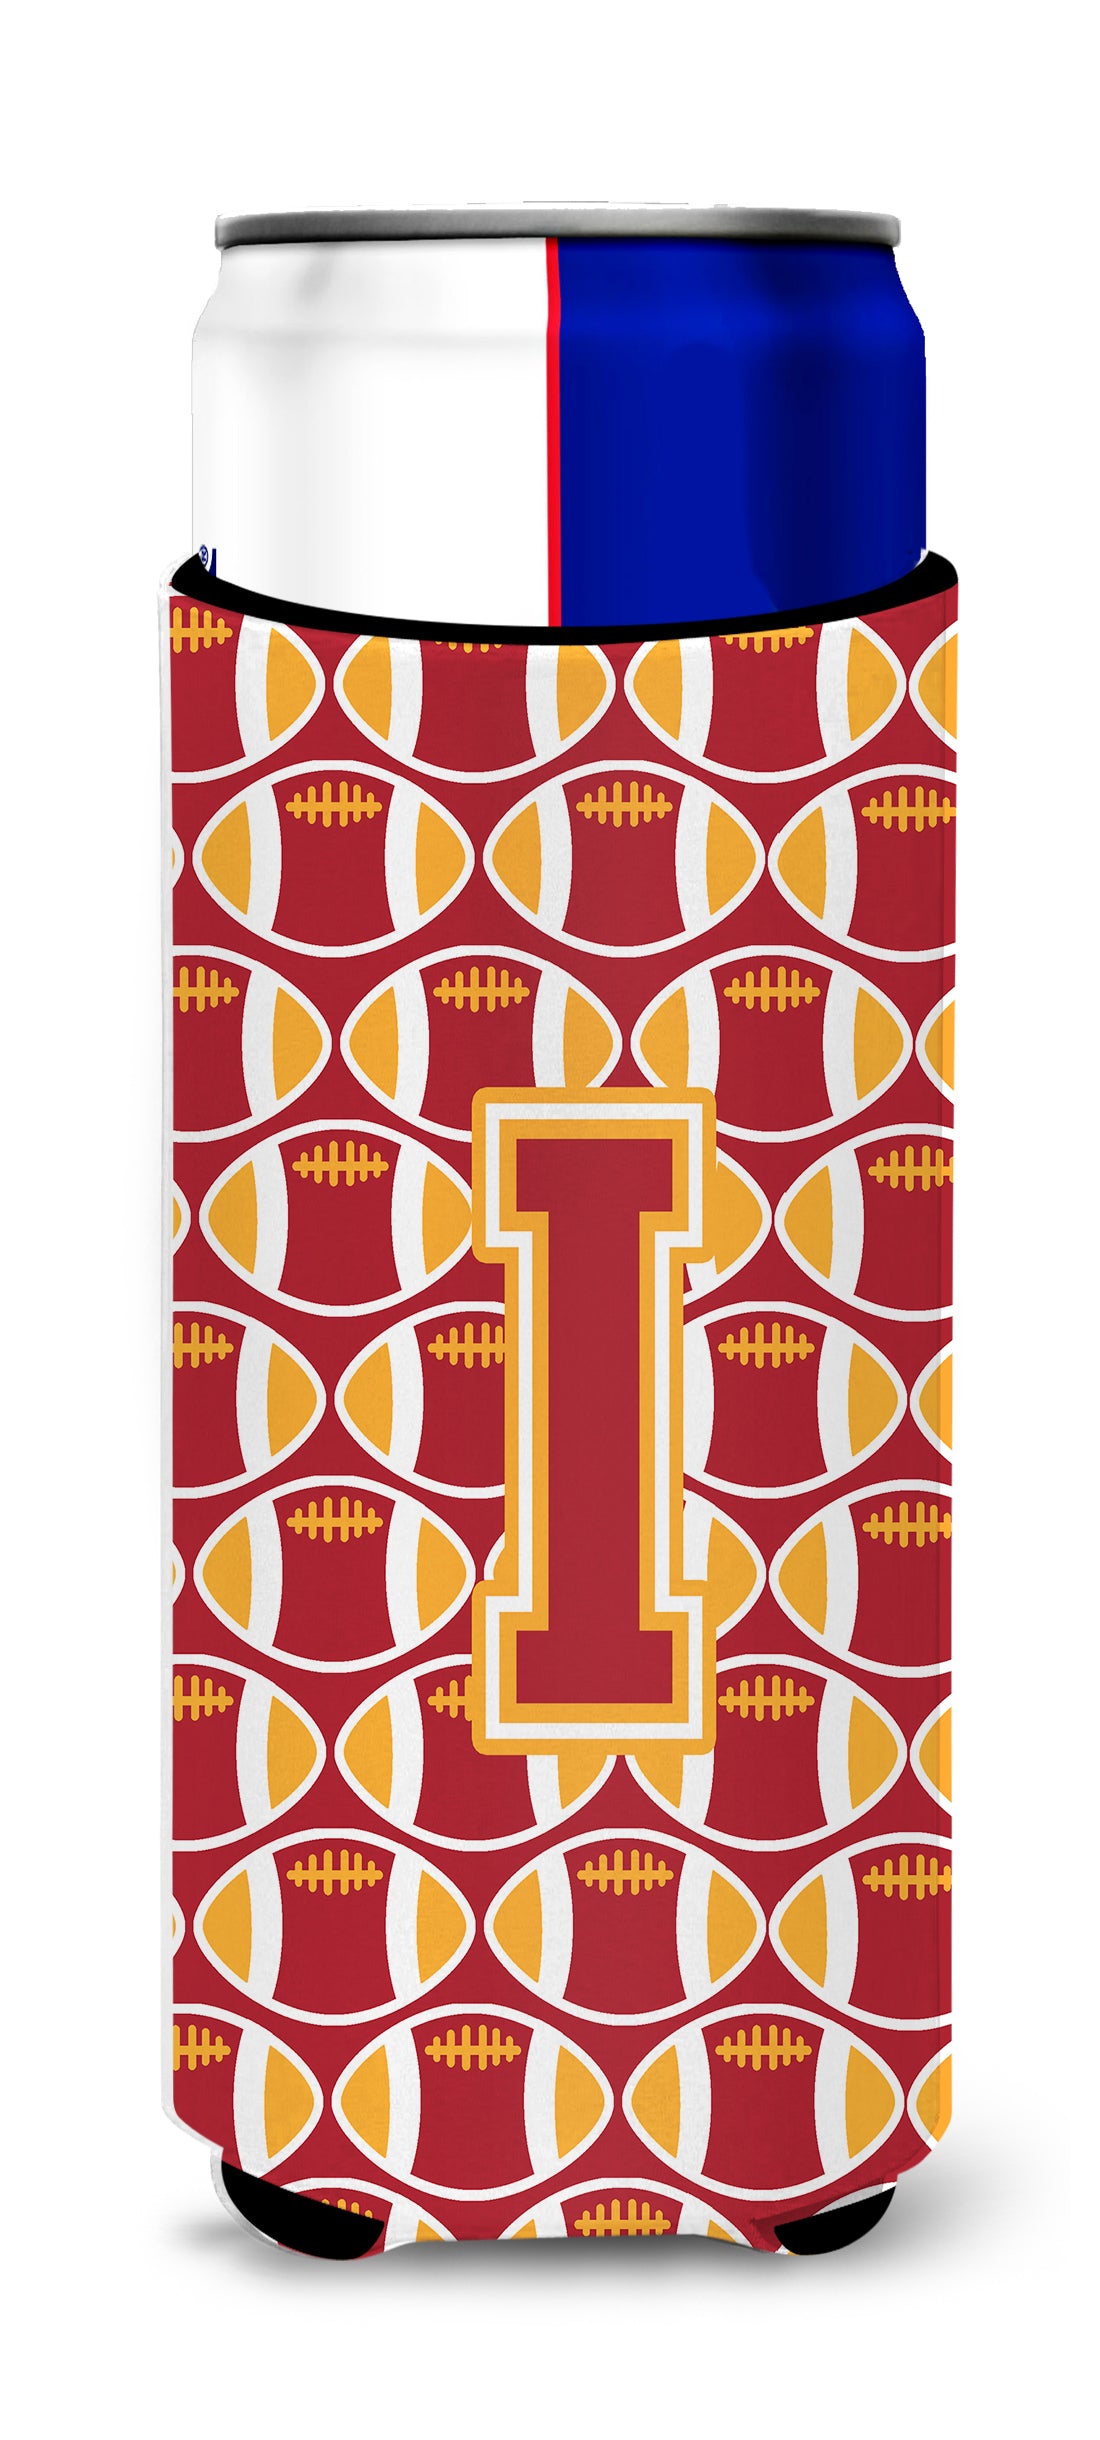 Letter I Football Cardinal and Gold Ultra Beverage Insulators for slim cans CJ1070-IMUK